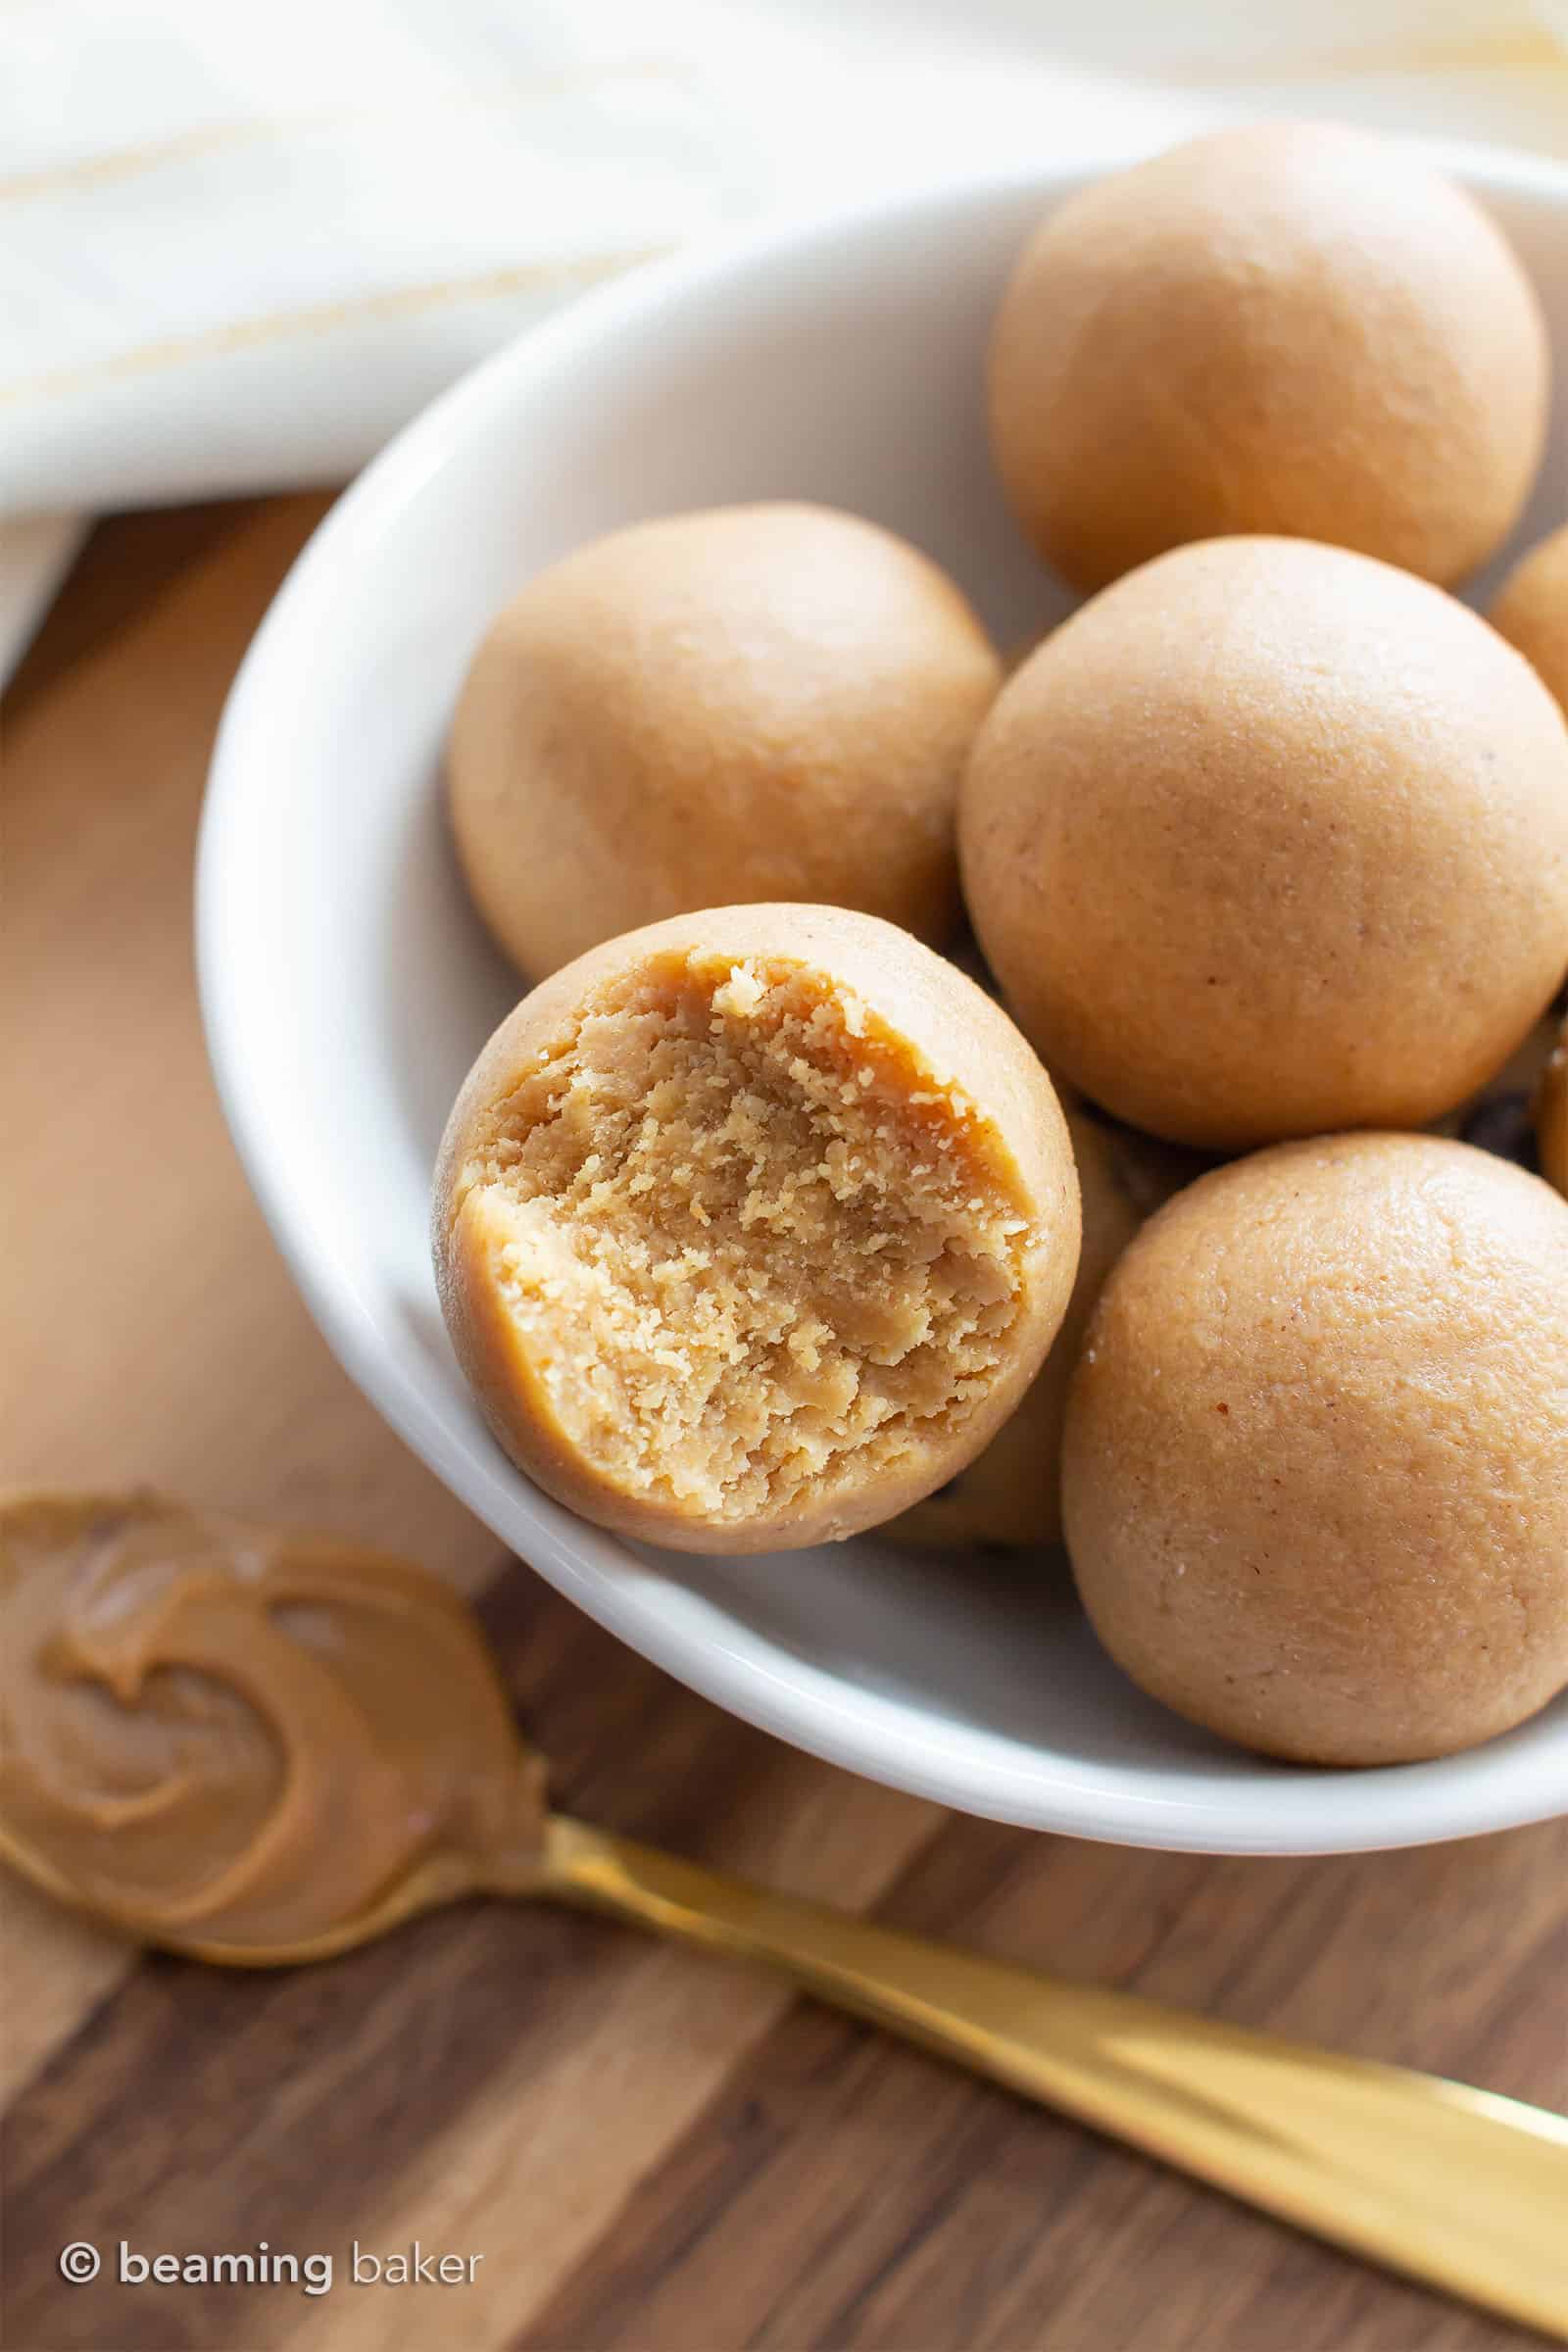 Peanut Butter Keto Energy Balls Recipe: just 3 ingredients for easy keto energy bites bursting with peanut butter flavor! Quick breakfast, protein-packed, Vegan, Gluten Free & Healthy. #Keto #PeanutButter #Healthy #LowCarb | Recipe at BeamingBaker.com